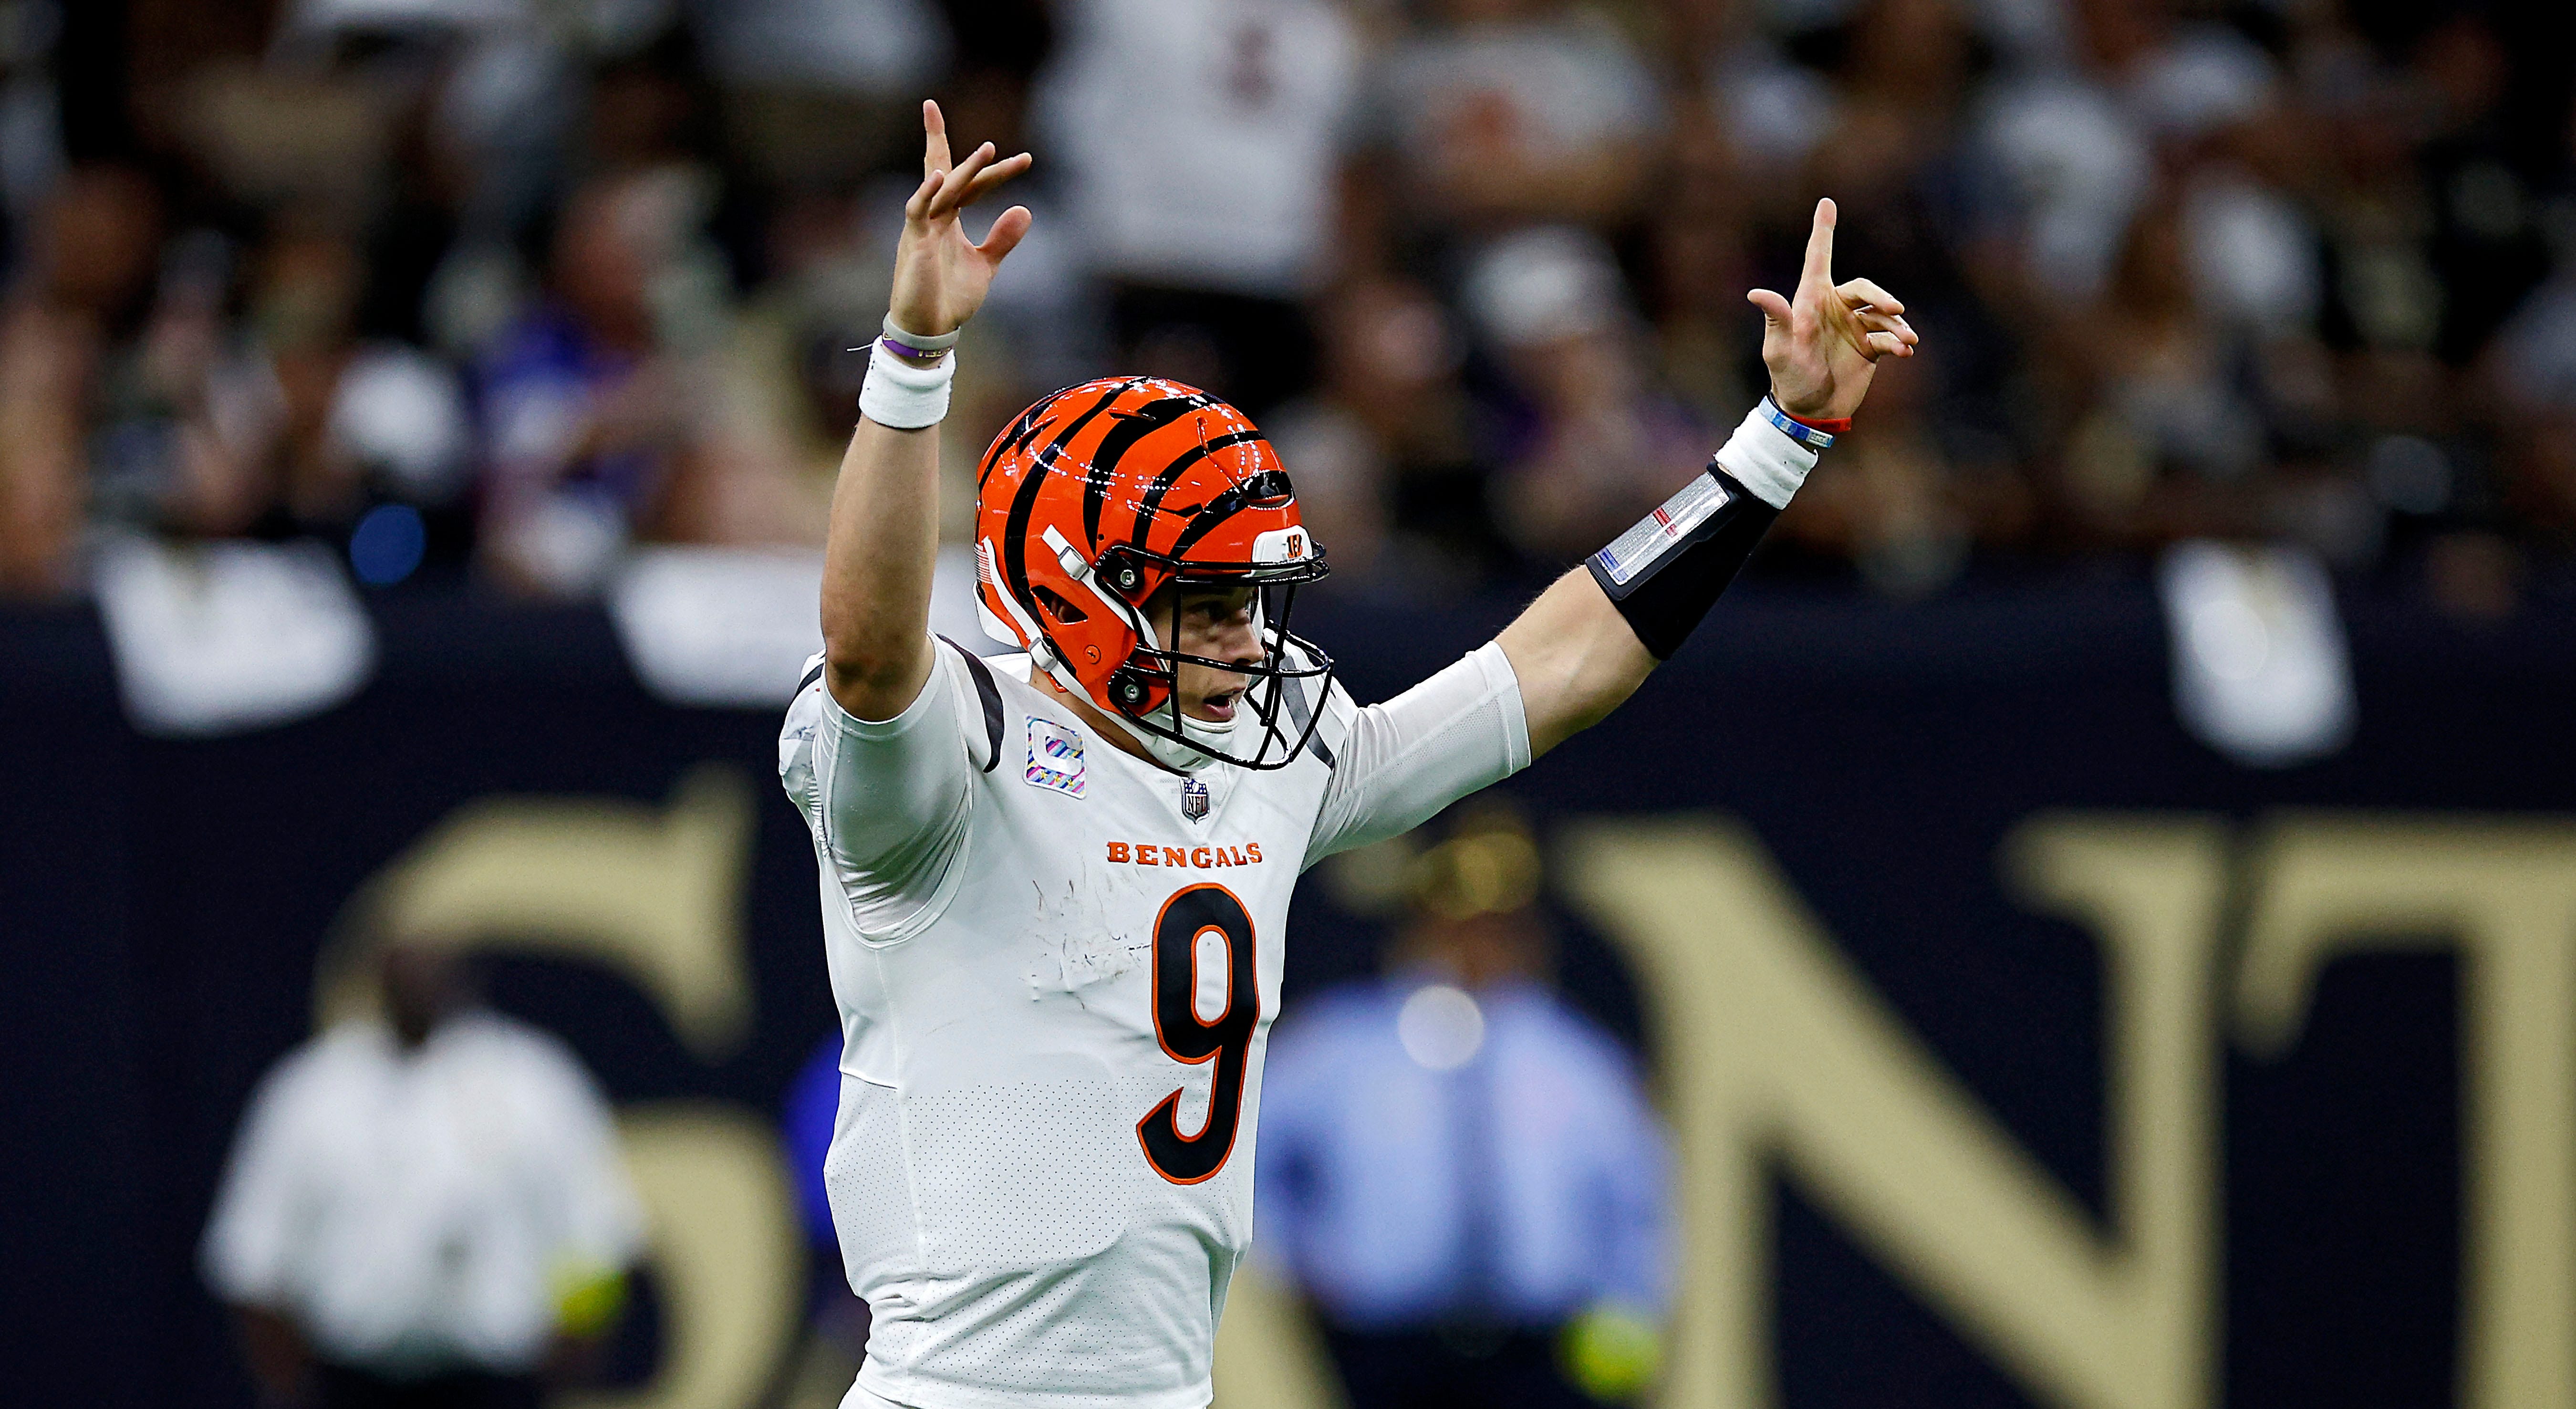 Bengals’ Joe Burrow hooks up with Ja’Marr Chase for two touchdowns in win over Saints